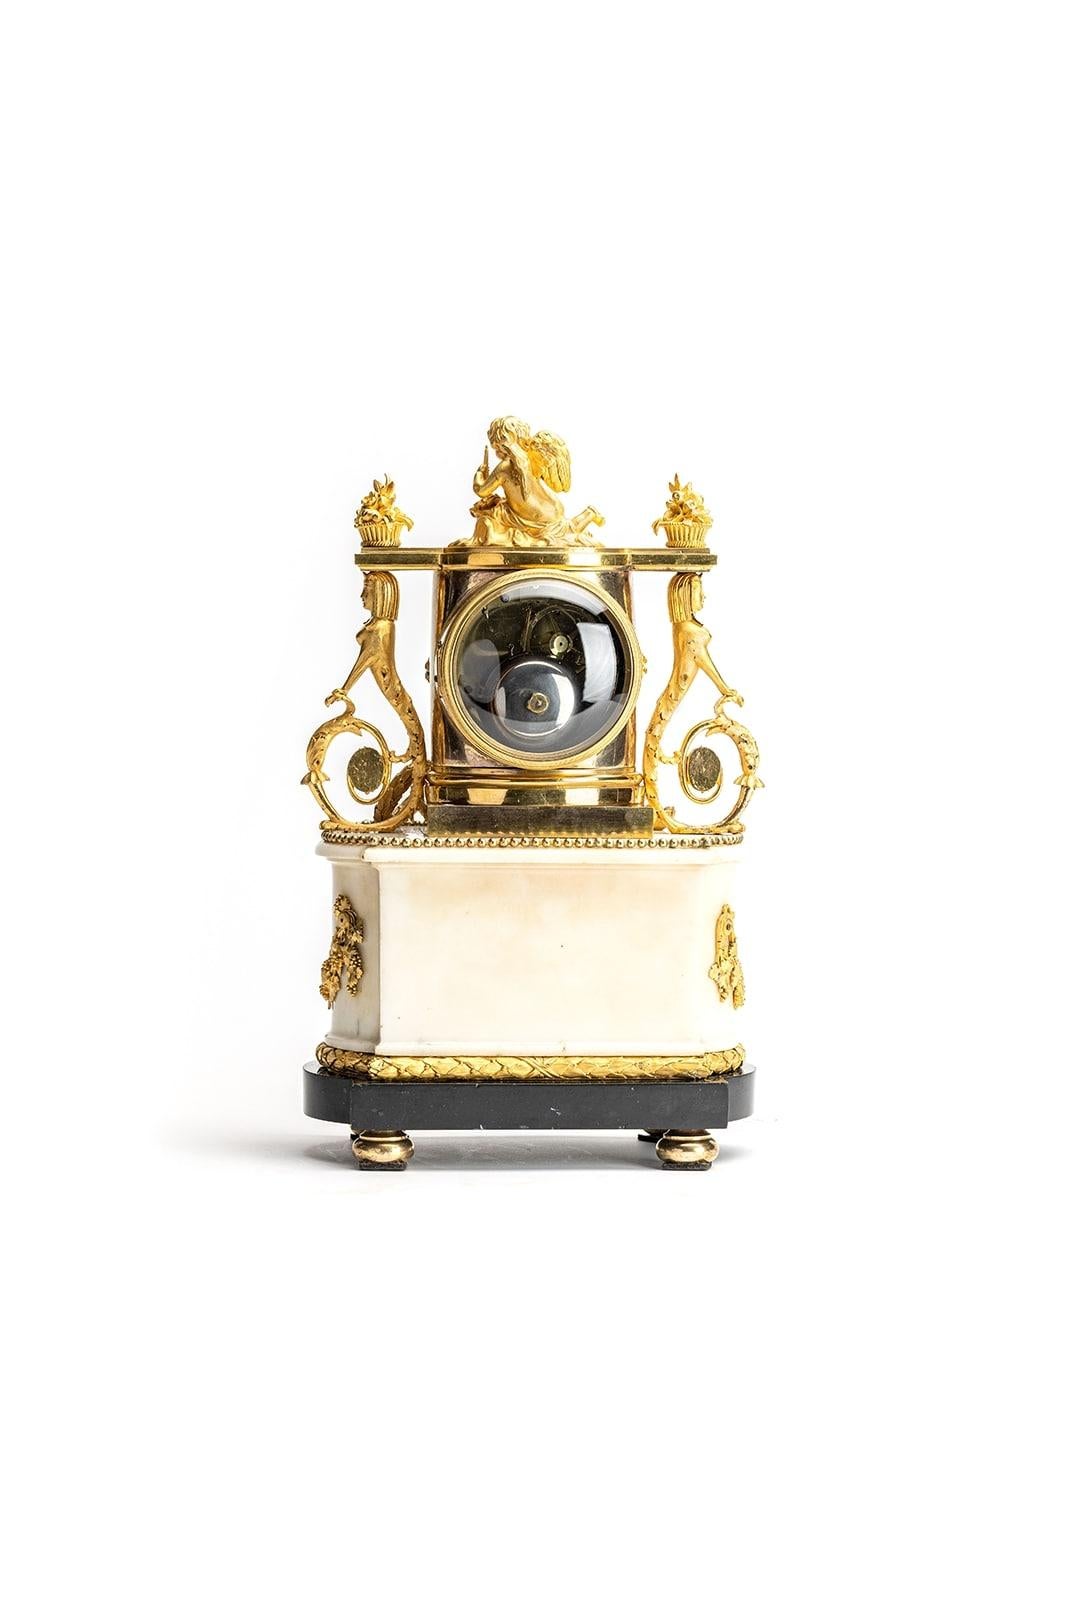 Beautiful pendule made by: Louis-François-Amable Molliens 
who was a clockmaker whose workshop was recorded as being, successively, in the rue Saint-Honoré around 1800, then in the passage du Grand-Cerf between 1806 and 1815 (see Tardy, Dictionnaire